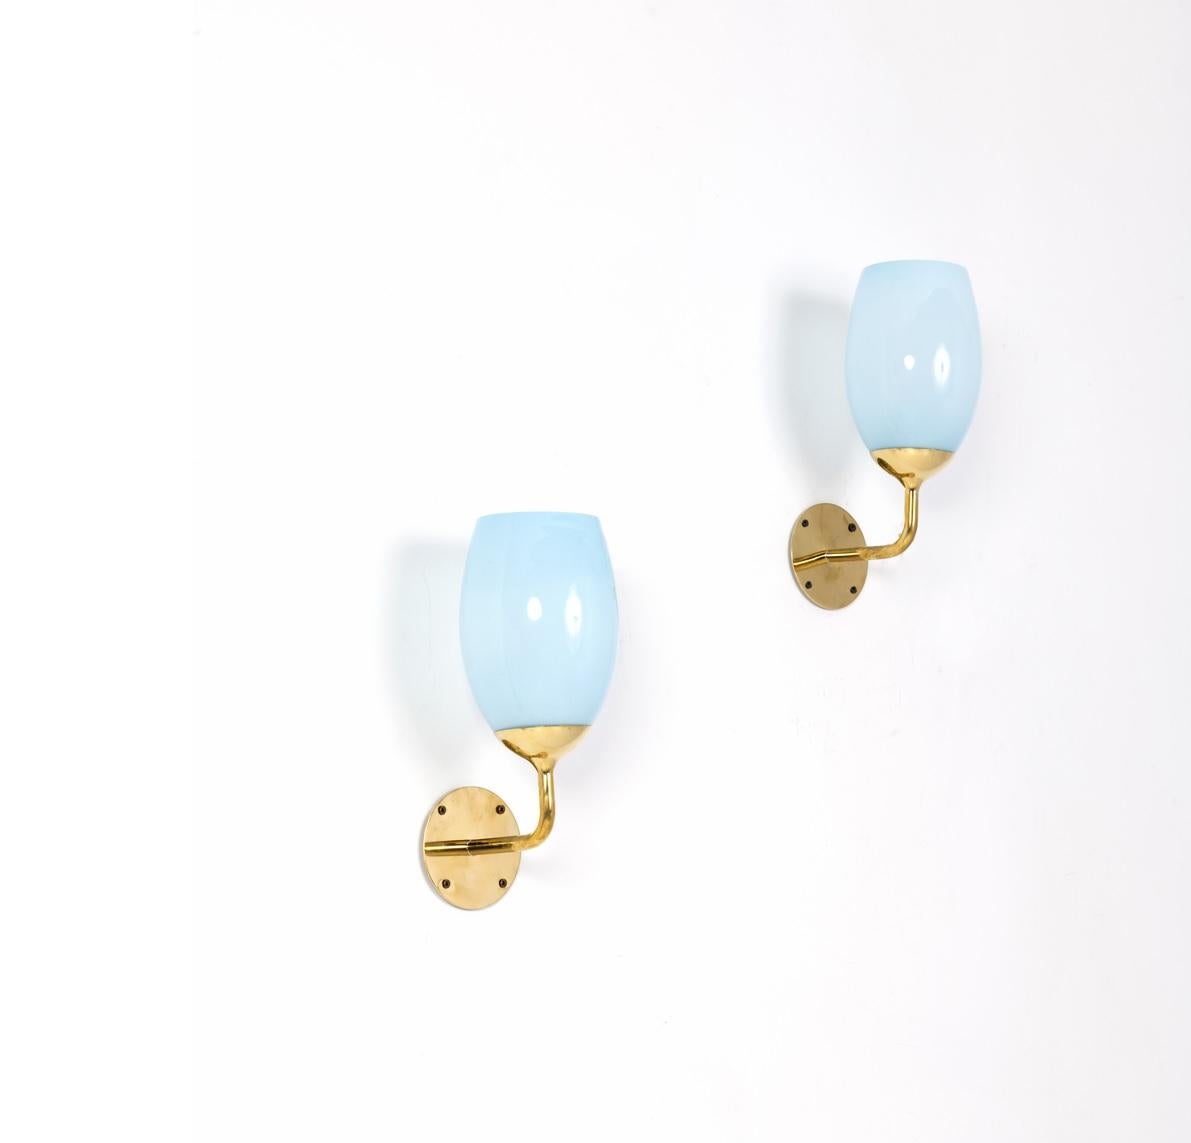 Pair of Paavo Tynell wall lights in brass and light blue glass for Taito Oy, Finland, 1940s.

Provenance: Kontiolax, Finland

Glass is in excellent condition with no chips or cracks. Height is 18 inches (44 cm).

Price is for the pair of lamps.